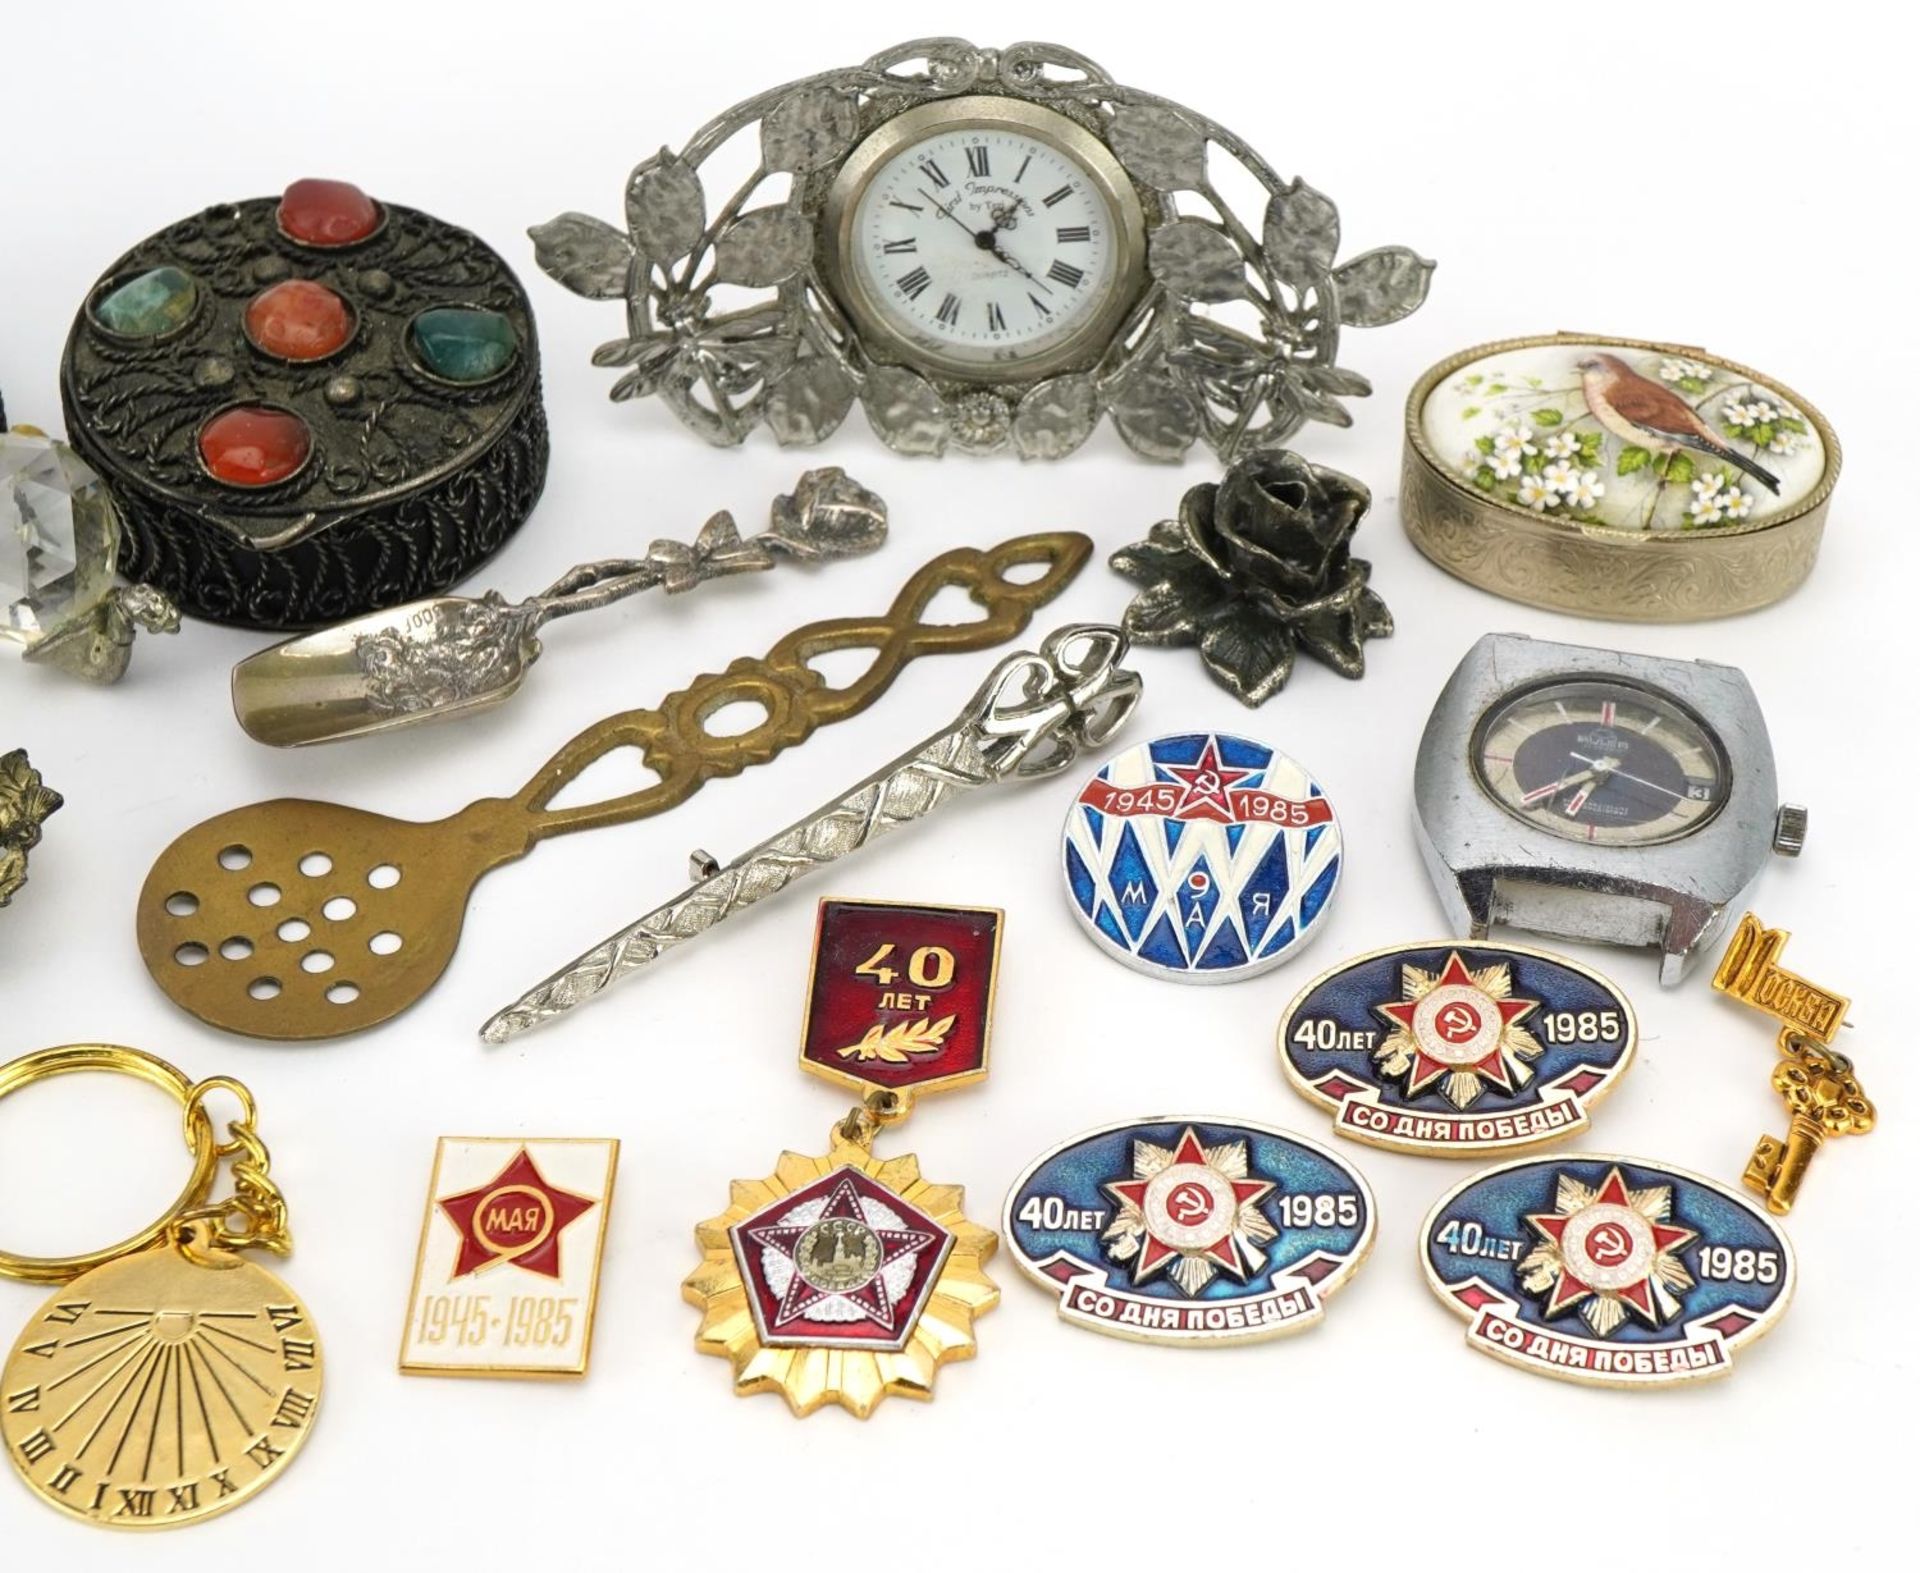 Objects including Russian enamelled badges, trinkets and a vintage Buler gentlemen's wristwatch - Image 3 of 3